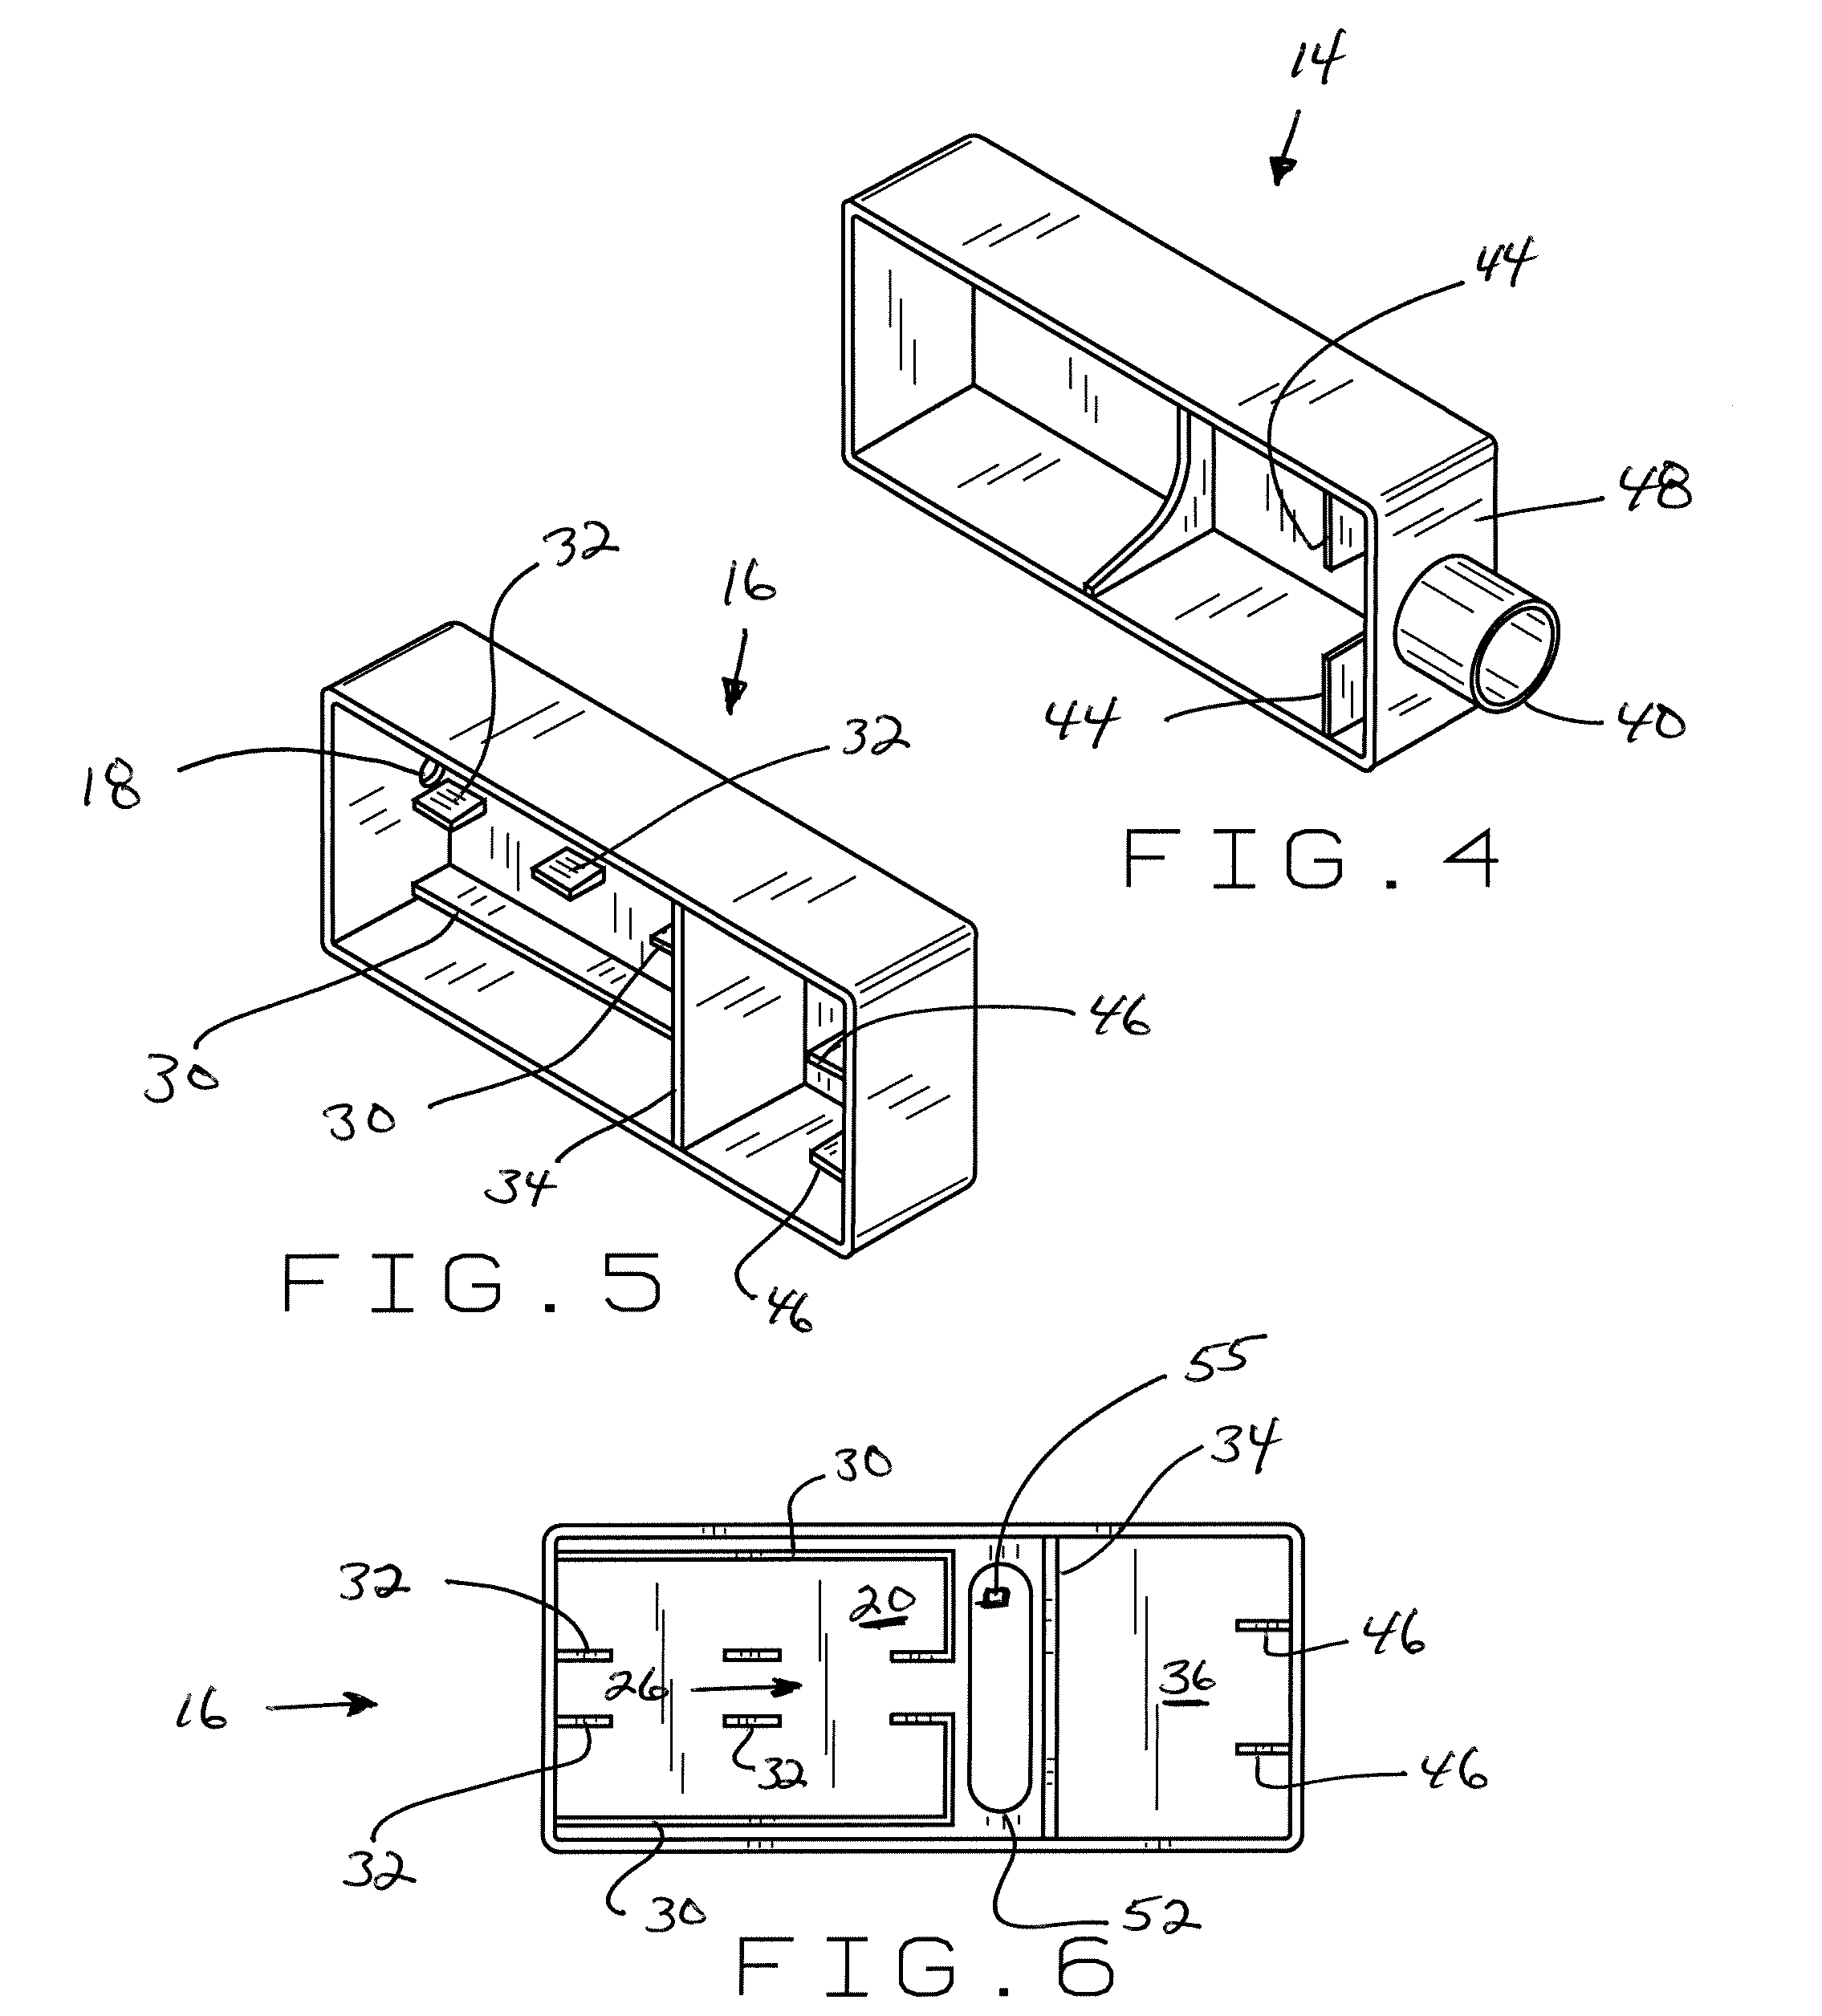 Filter assembly with noise attenuation